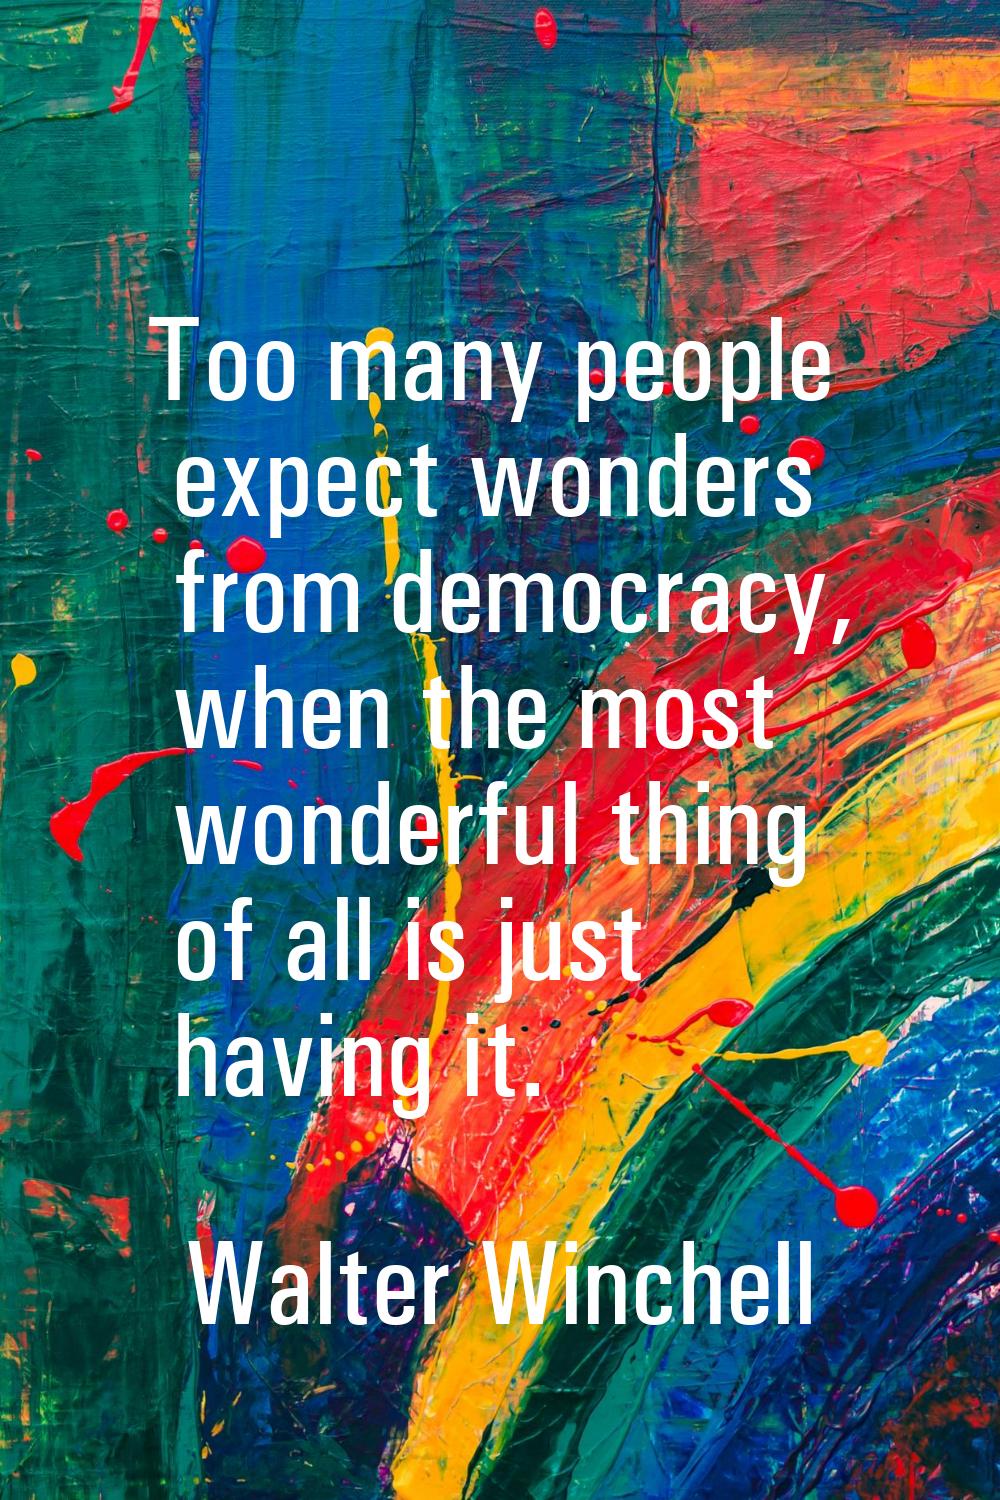 Too many people expect wonders from democracy, when the most wonderful thing of all is just having 